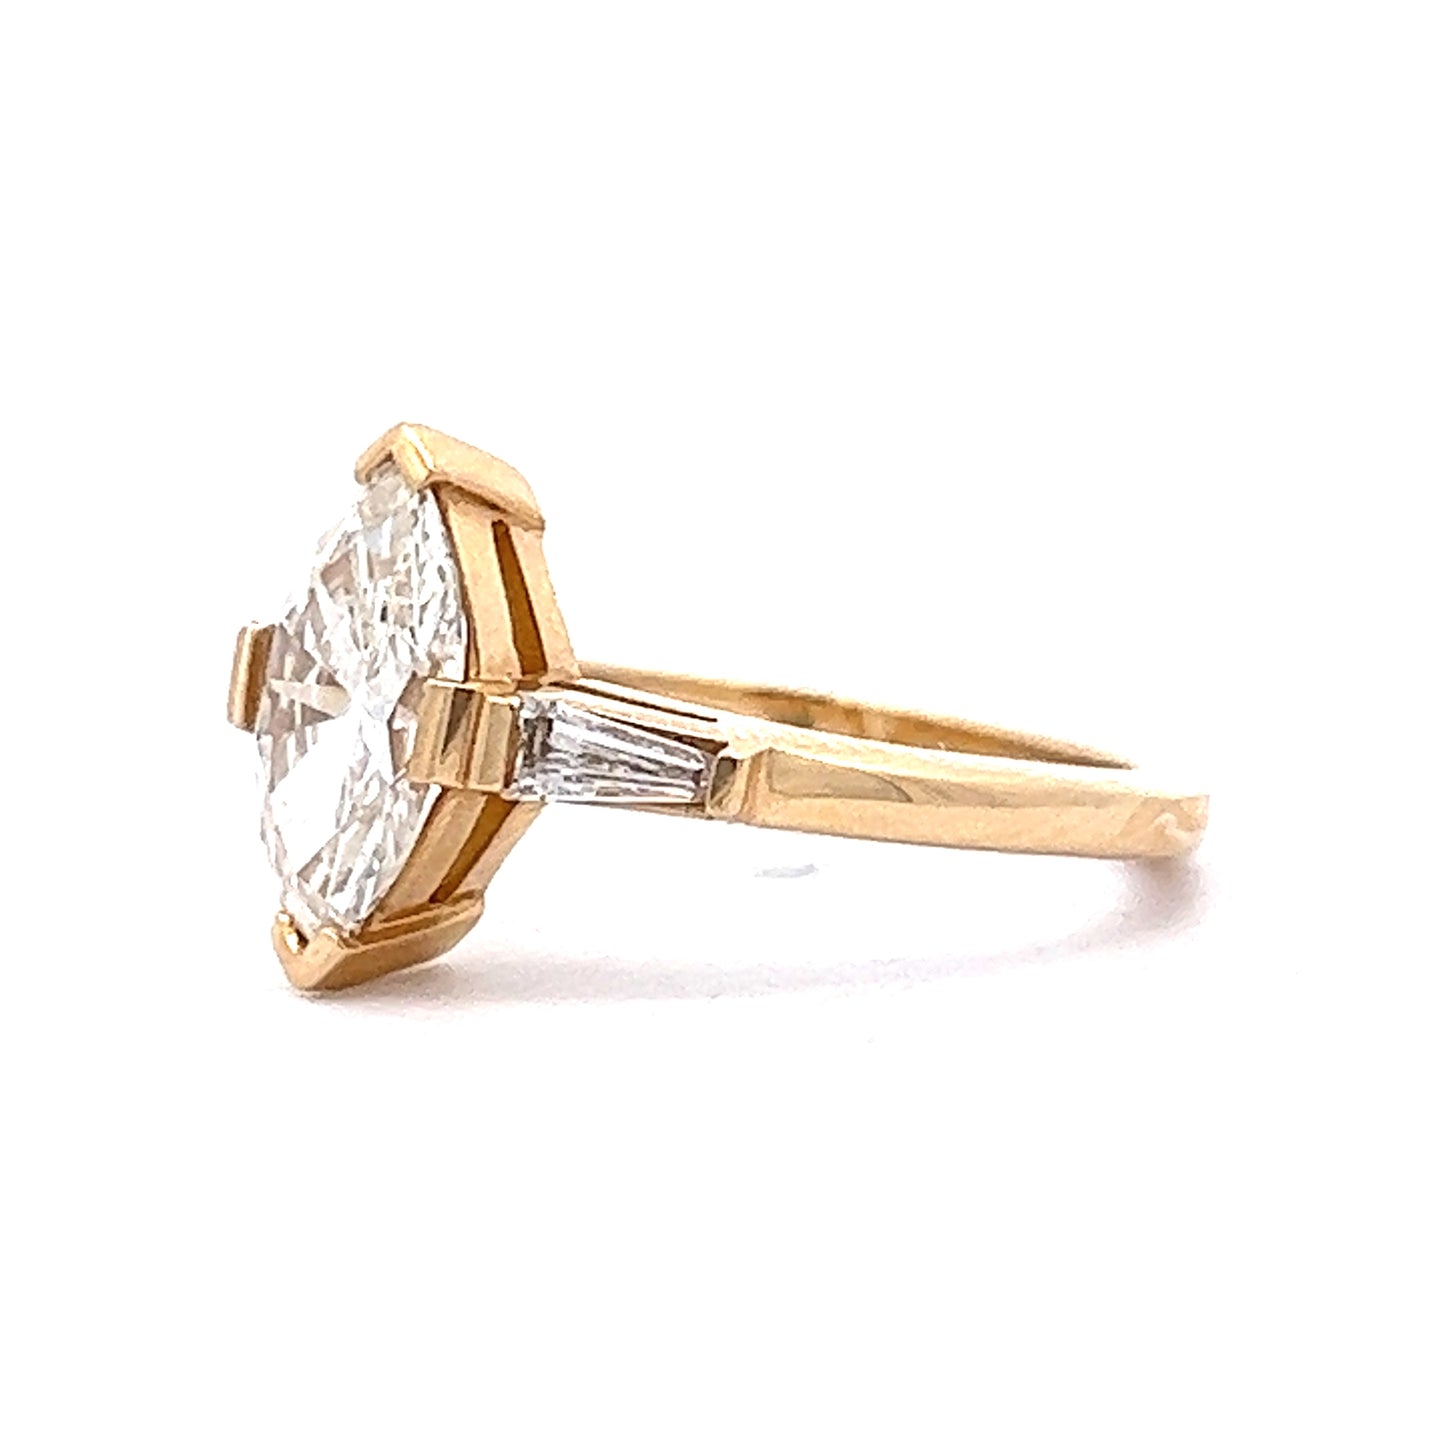 1.33 Marquise Cut Diamond Engagement Ring in 14k